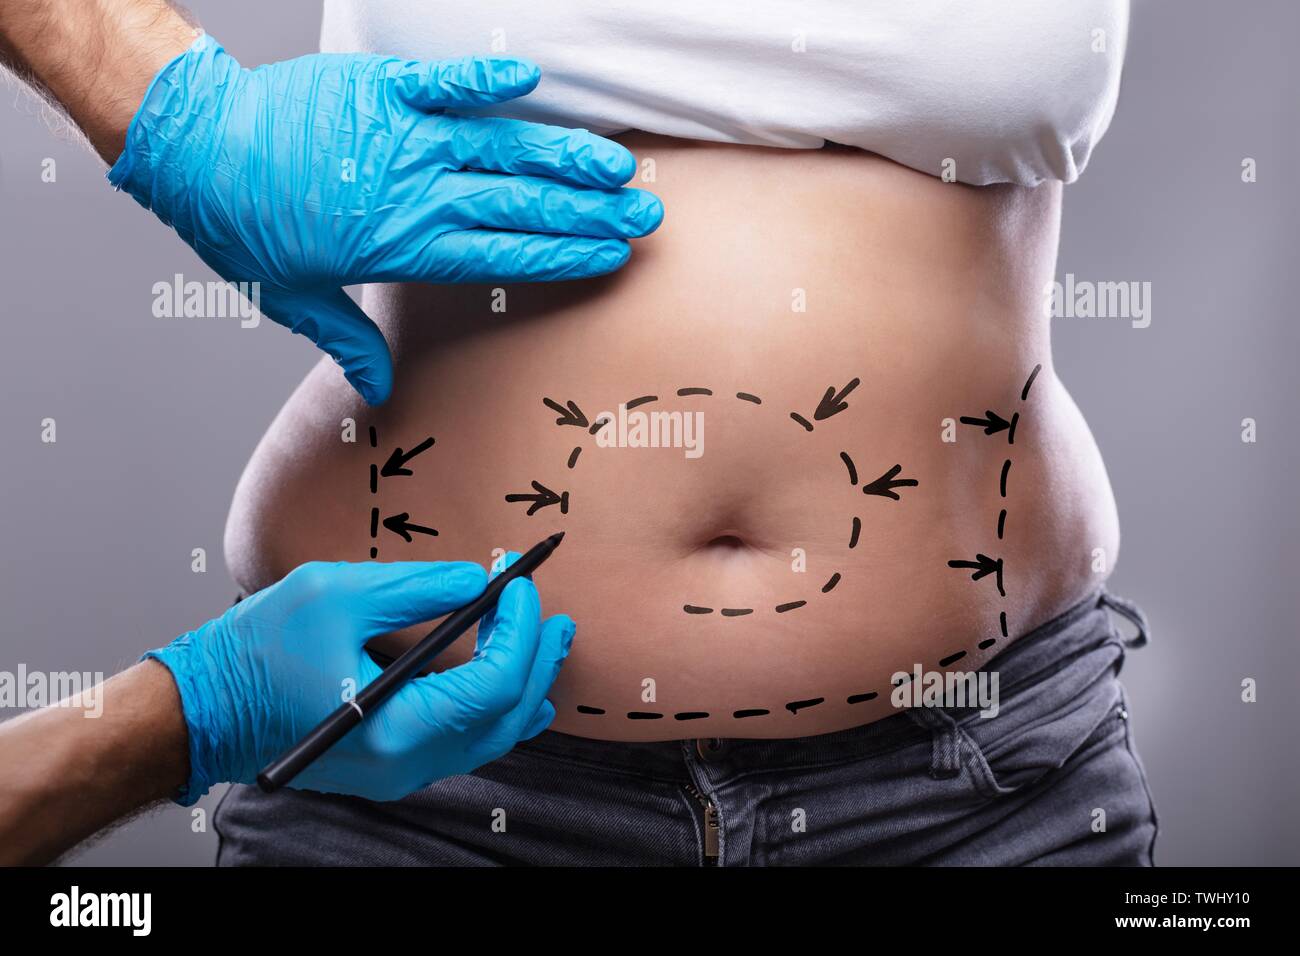 Close-up Of Plastic Surgeon In Blue Gloves Drawing On Woman's Stomach With Pen For Surgery Stock Photo